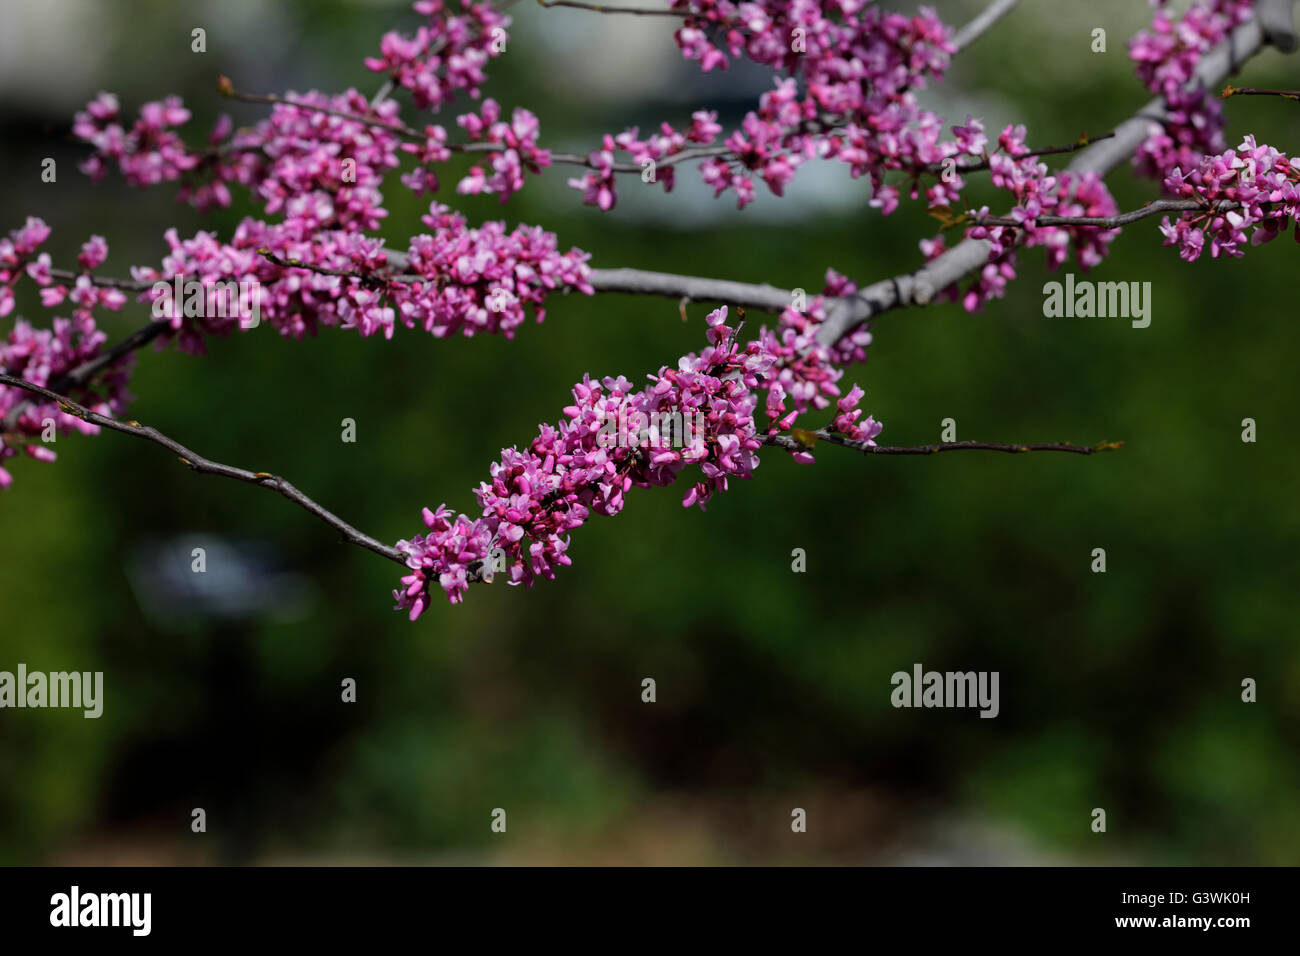 Eastern redbud blossoms on branches. Stock Photo